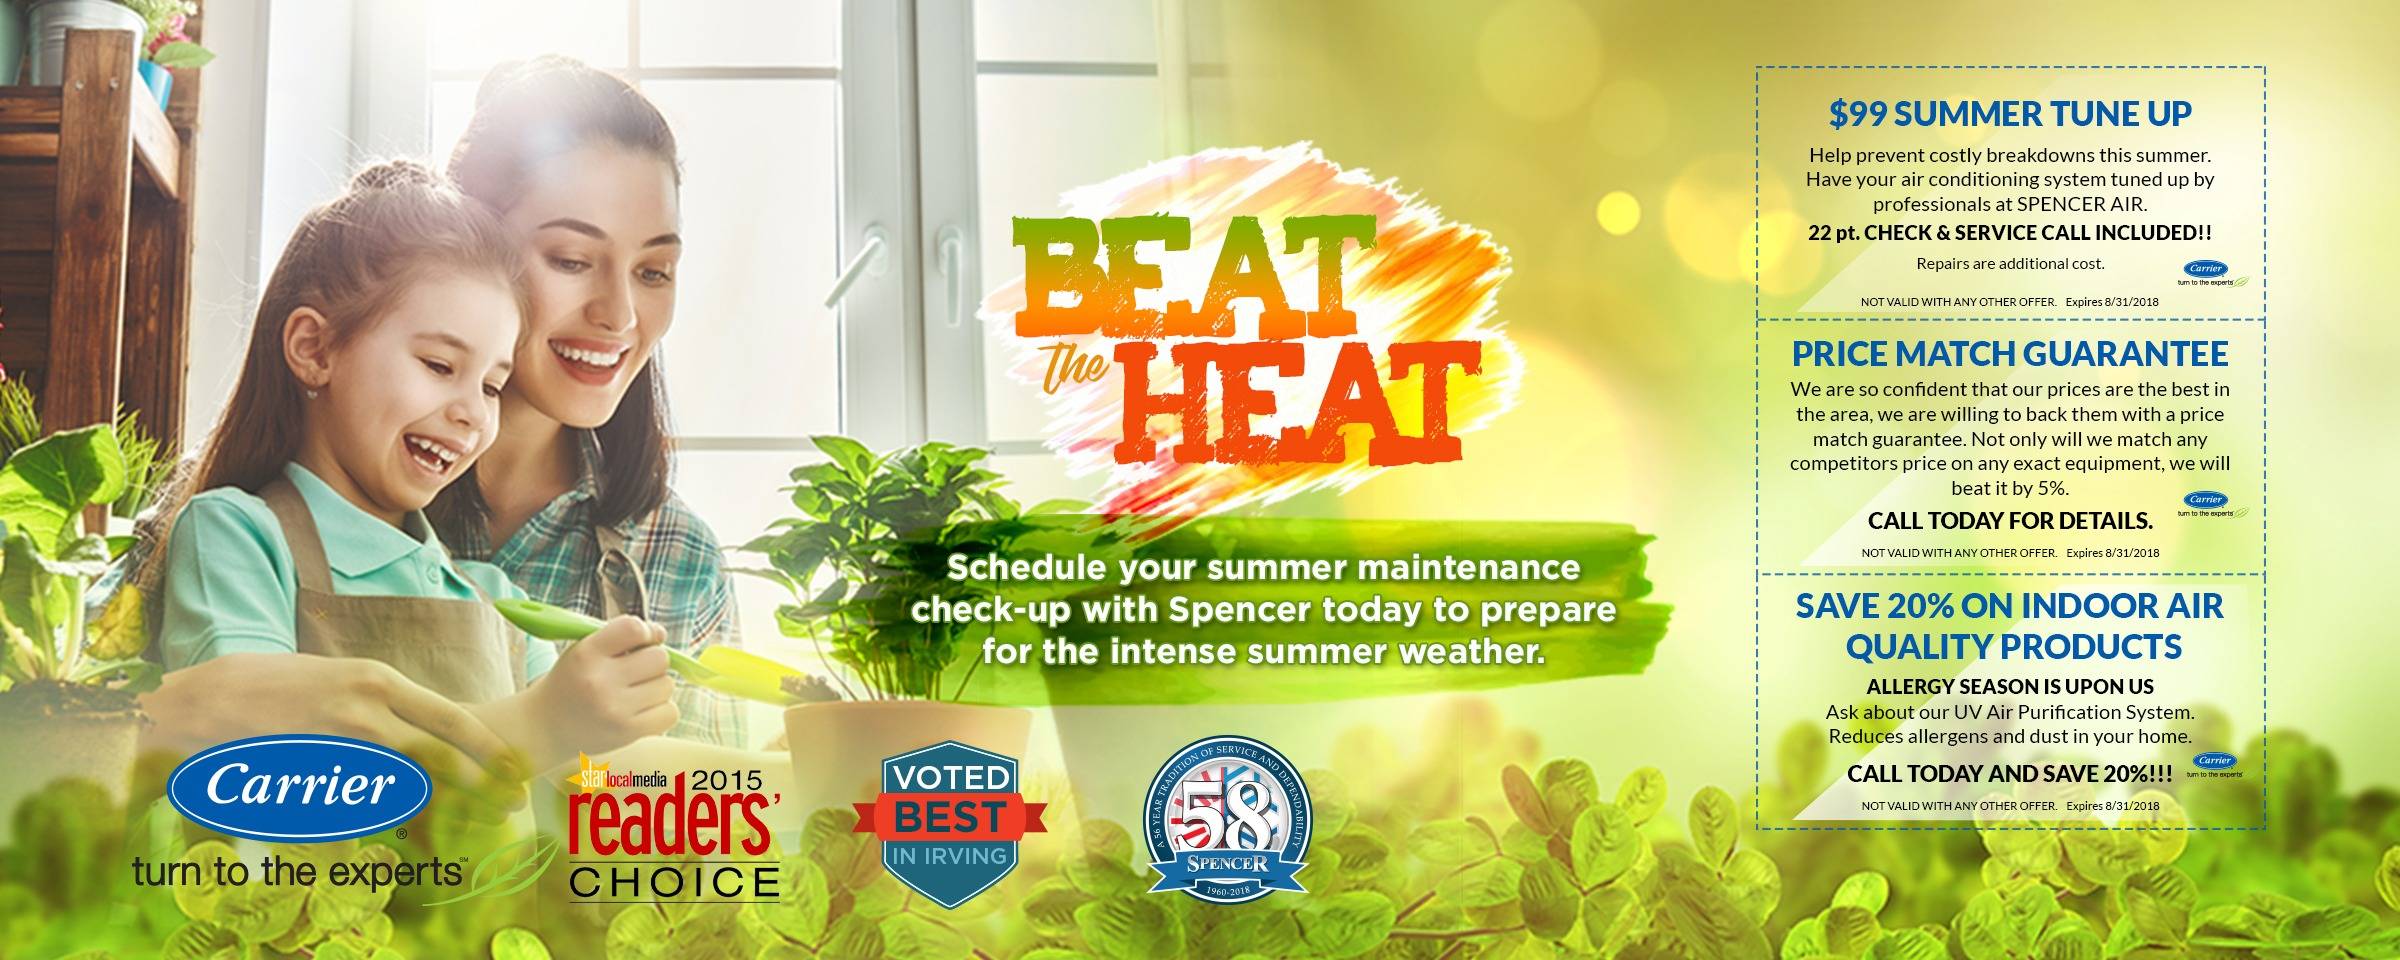 beat the heat schedule your summer maintenance check-up with spencer today to prepare for the intense summer weather